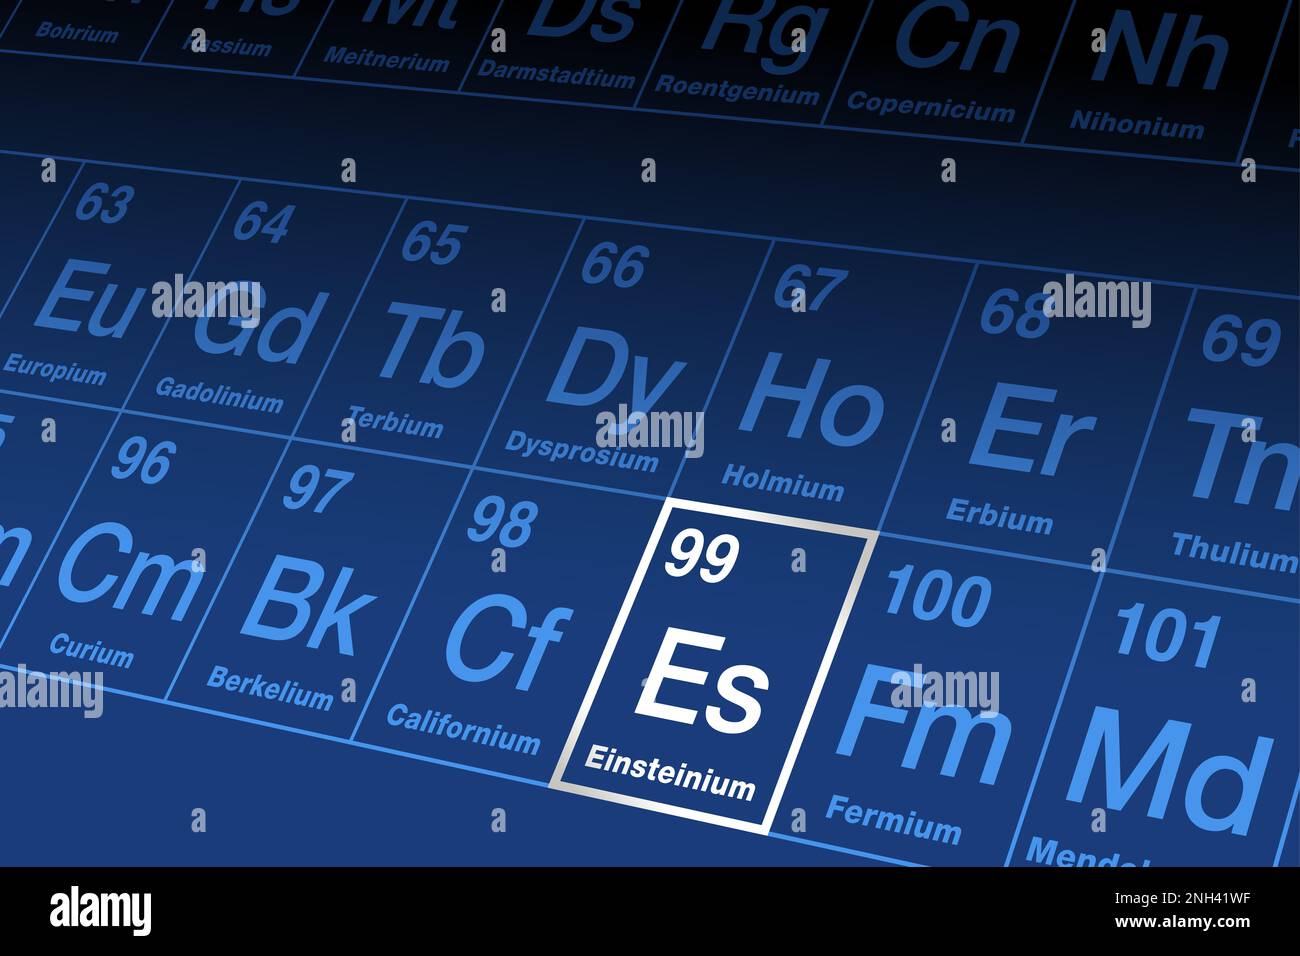 Einsteinium on periodic table. Radioactive transuranic metallic element in the actinide series, with atomic number 99 and symbol Es. Stock Photo